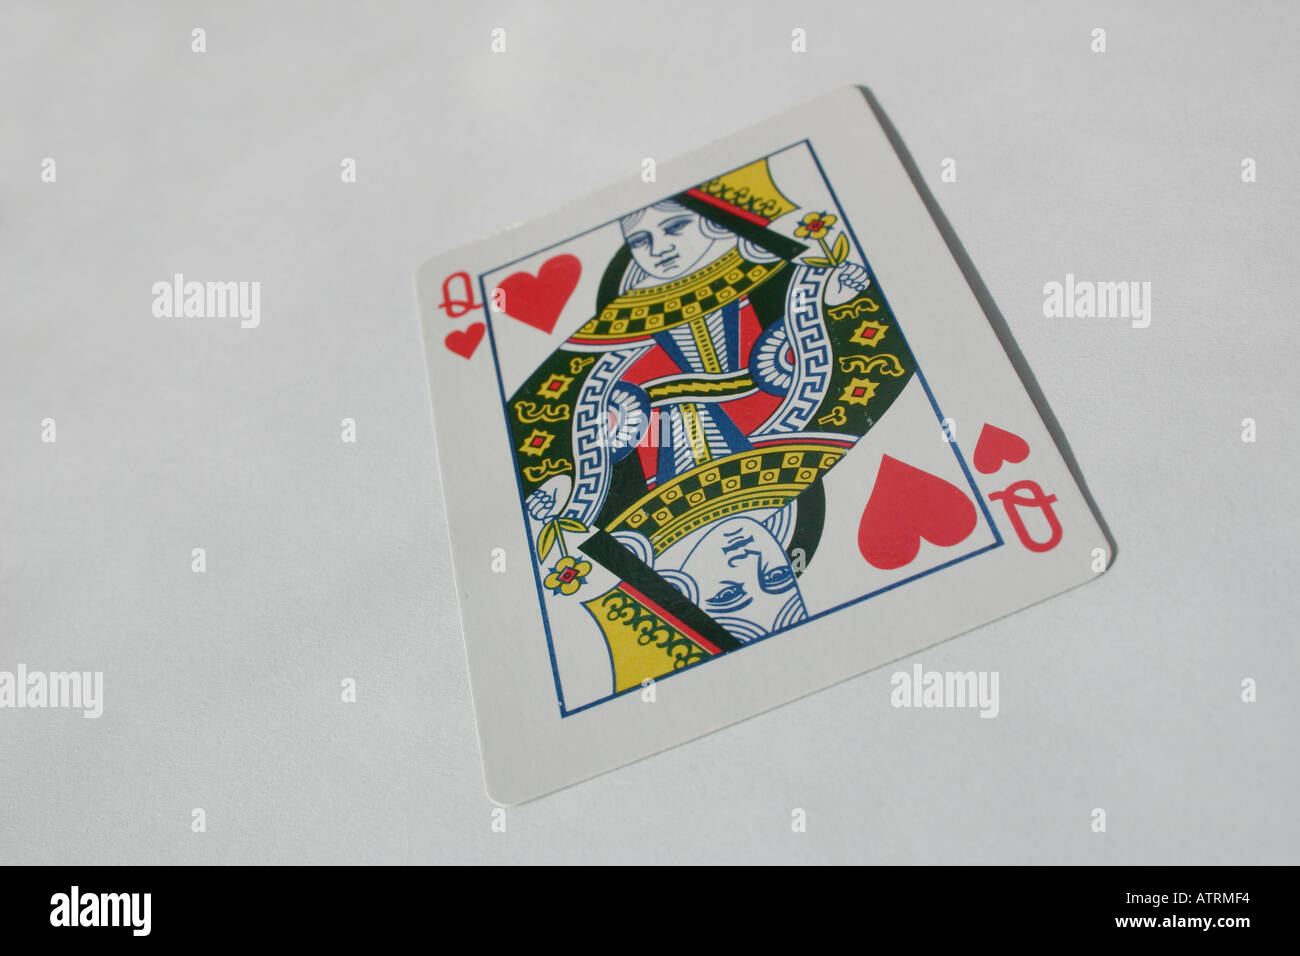 Queen of hearts card from deck of cards on plain background Stock Photo ...